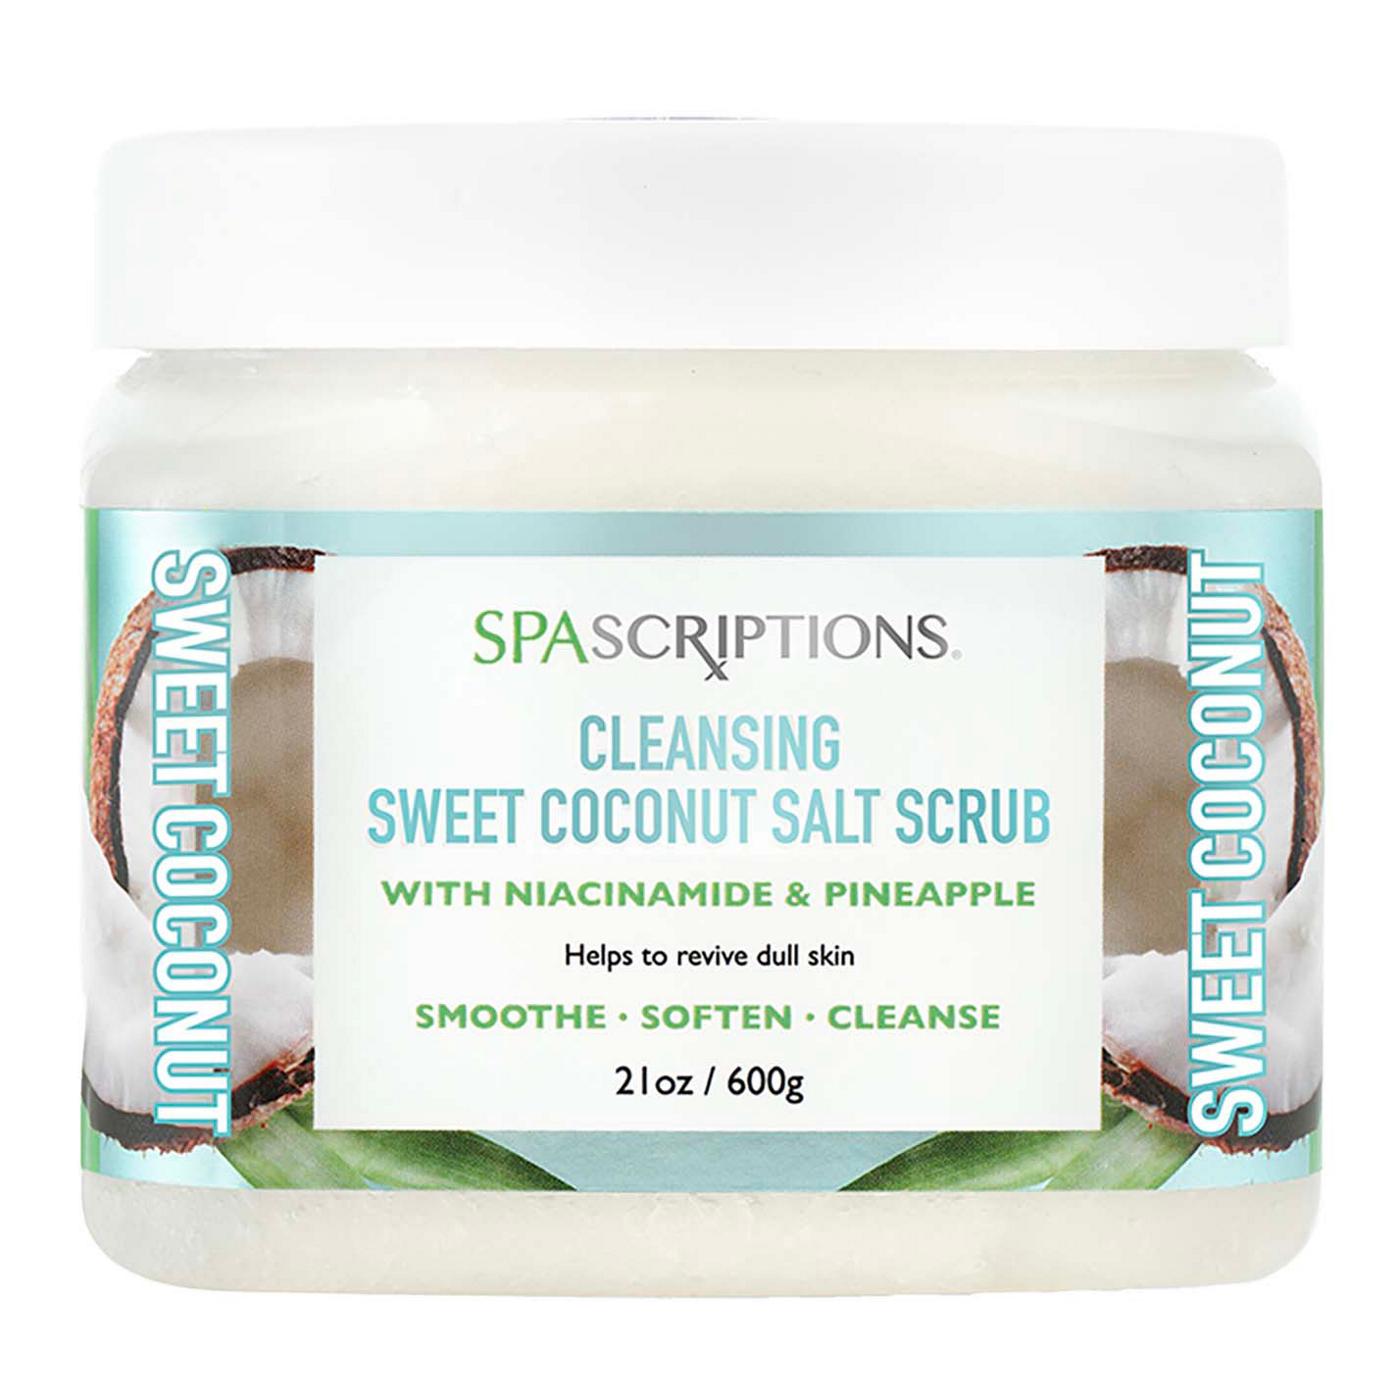 SpaScriptions Cleansing Salt Scrub - Sweet Coconut; image 1 of 5